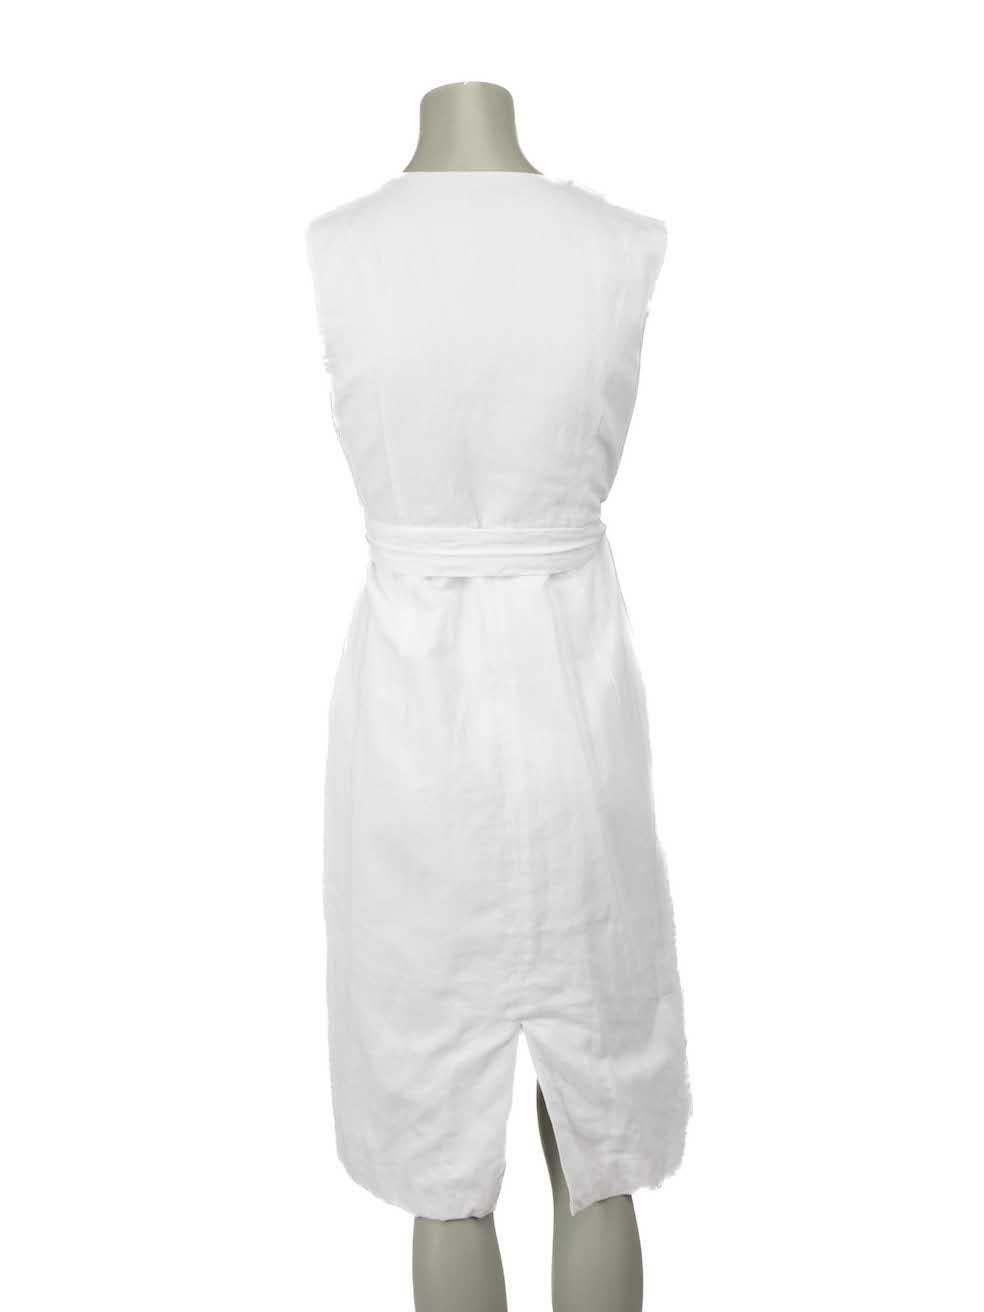 Dries Van Noten White Ruffle Accent Midi Dress Size S In Excellent Condition For Sale In London, GB